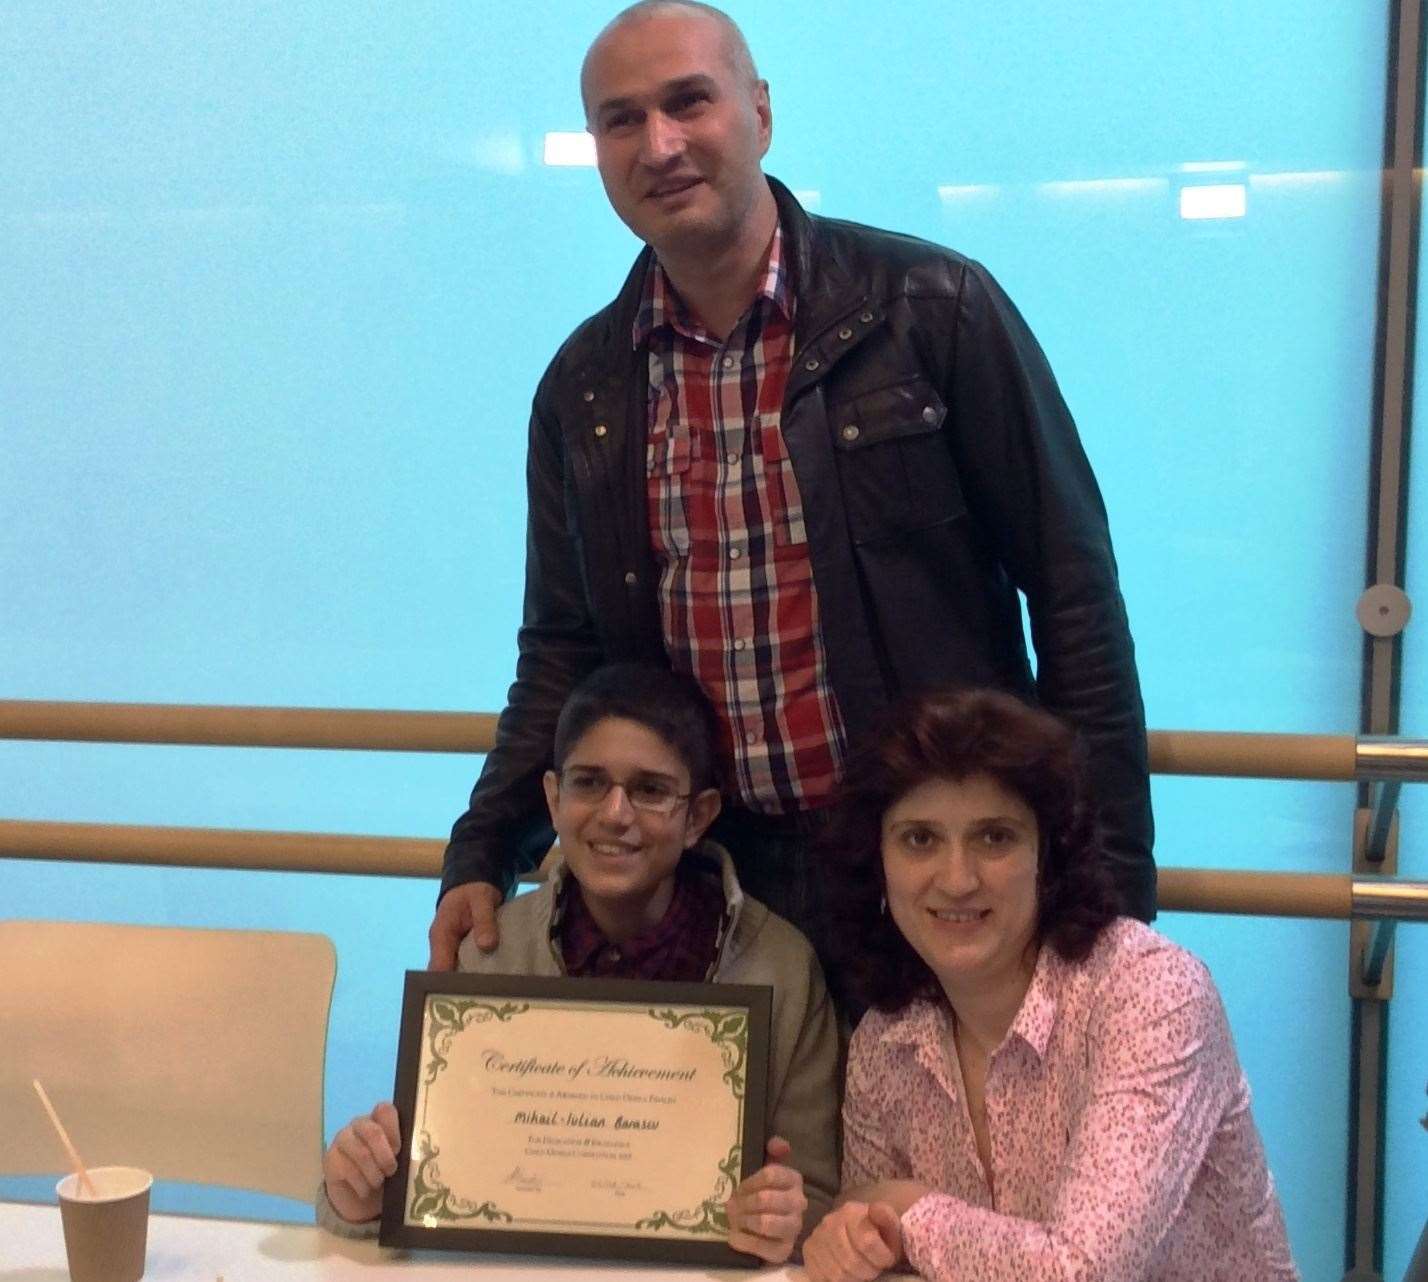 Iulian, aged 12, with dad Gheorghe and mum Gabriela, with certificate for reaching the final of Channel 4's Child Genius show